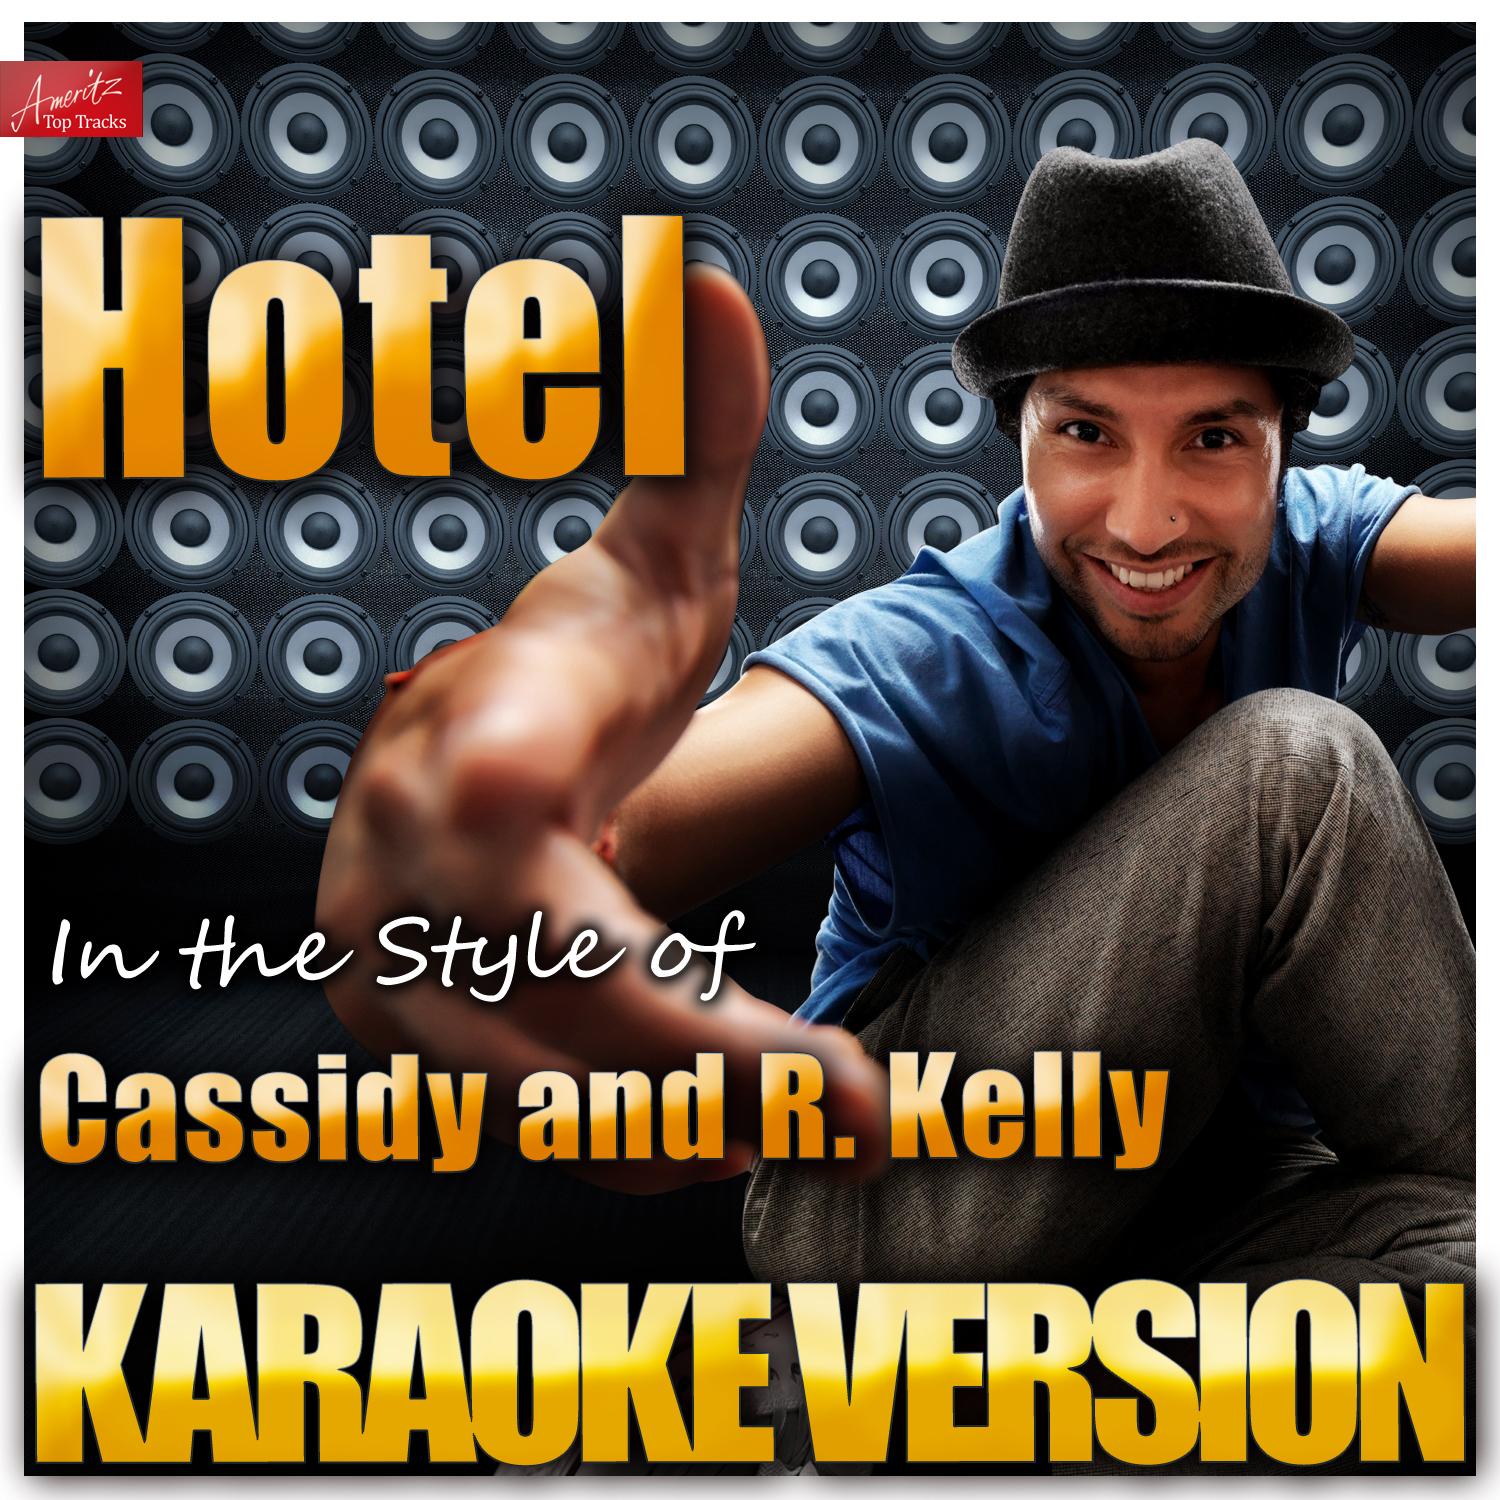 Hotel (In the Style of Cassidy and R. Kelly) [Karaoke Version]